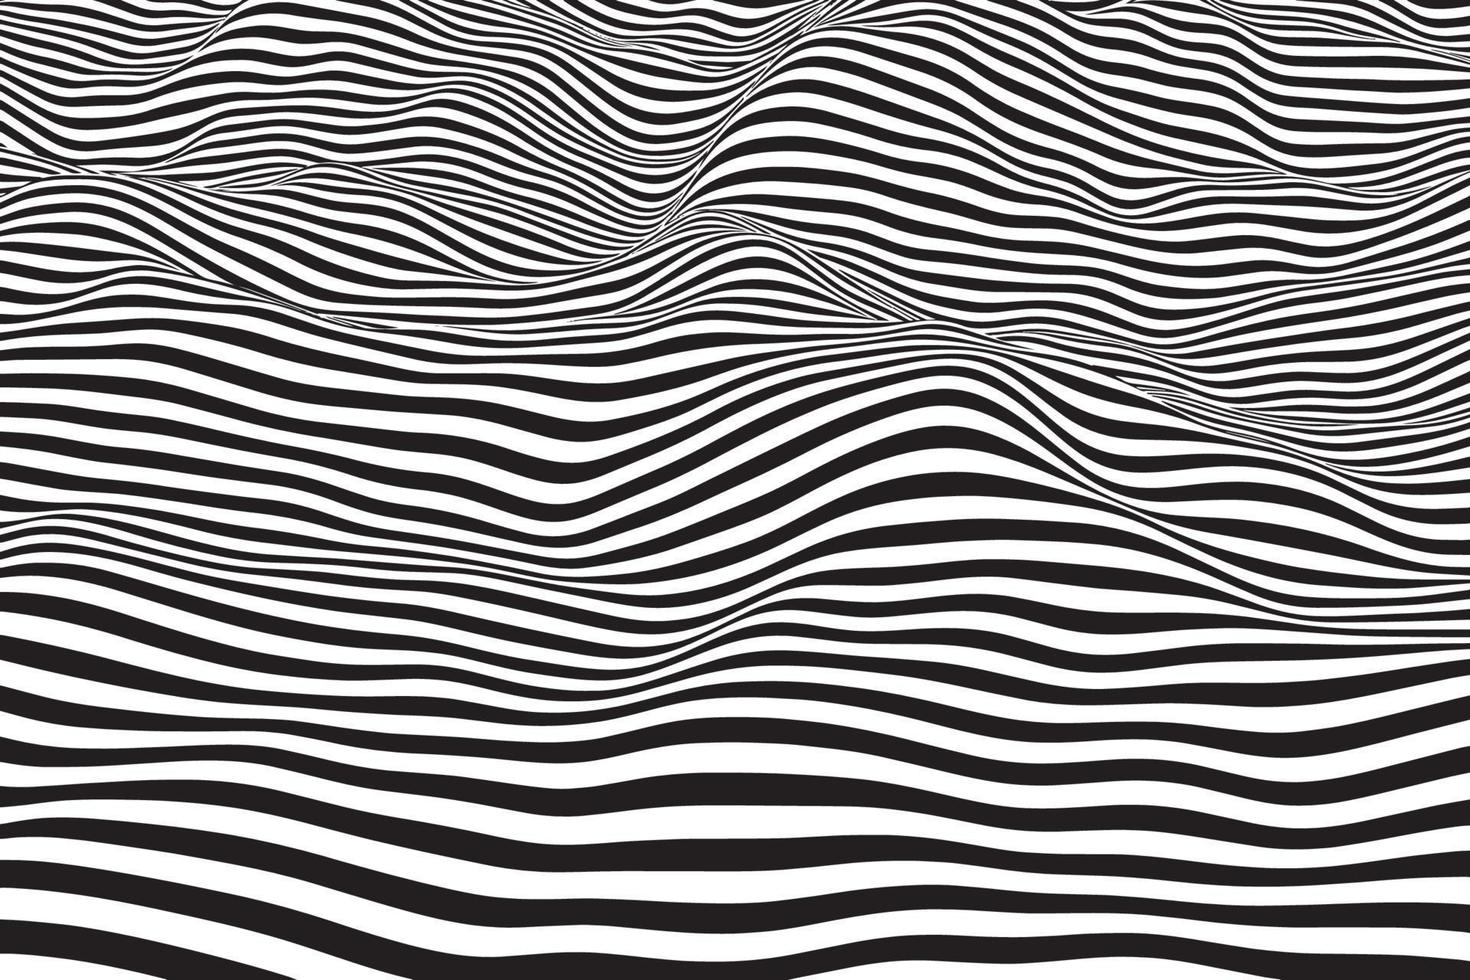 Elegant minimalist striped wave texture. Stylish abstract mono-color curve lines background. Fashion black and white smooth surface vector